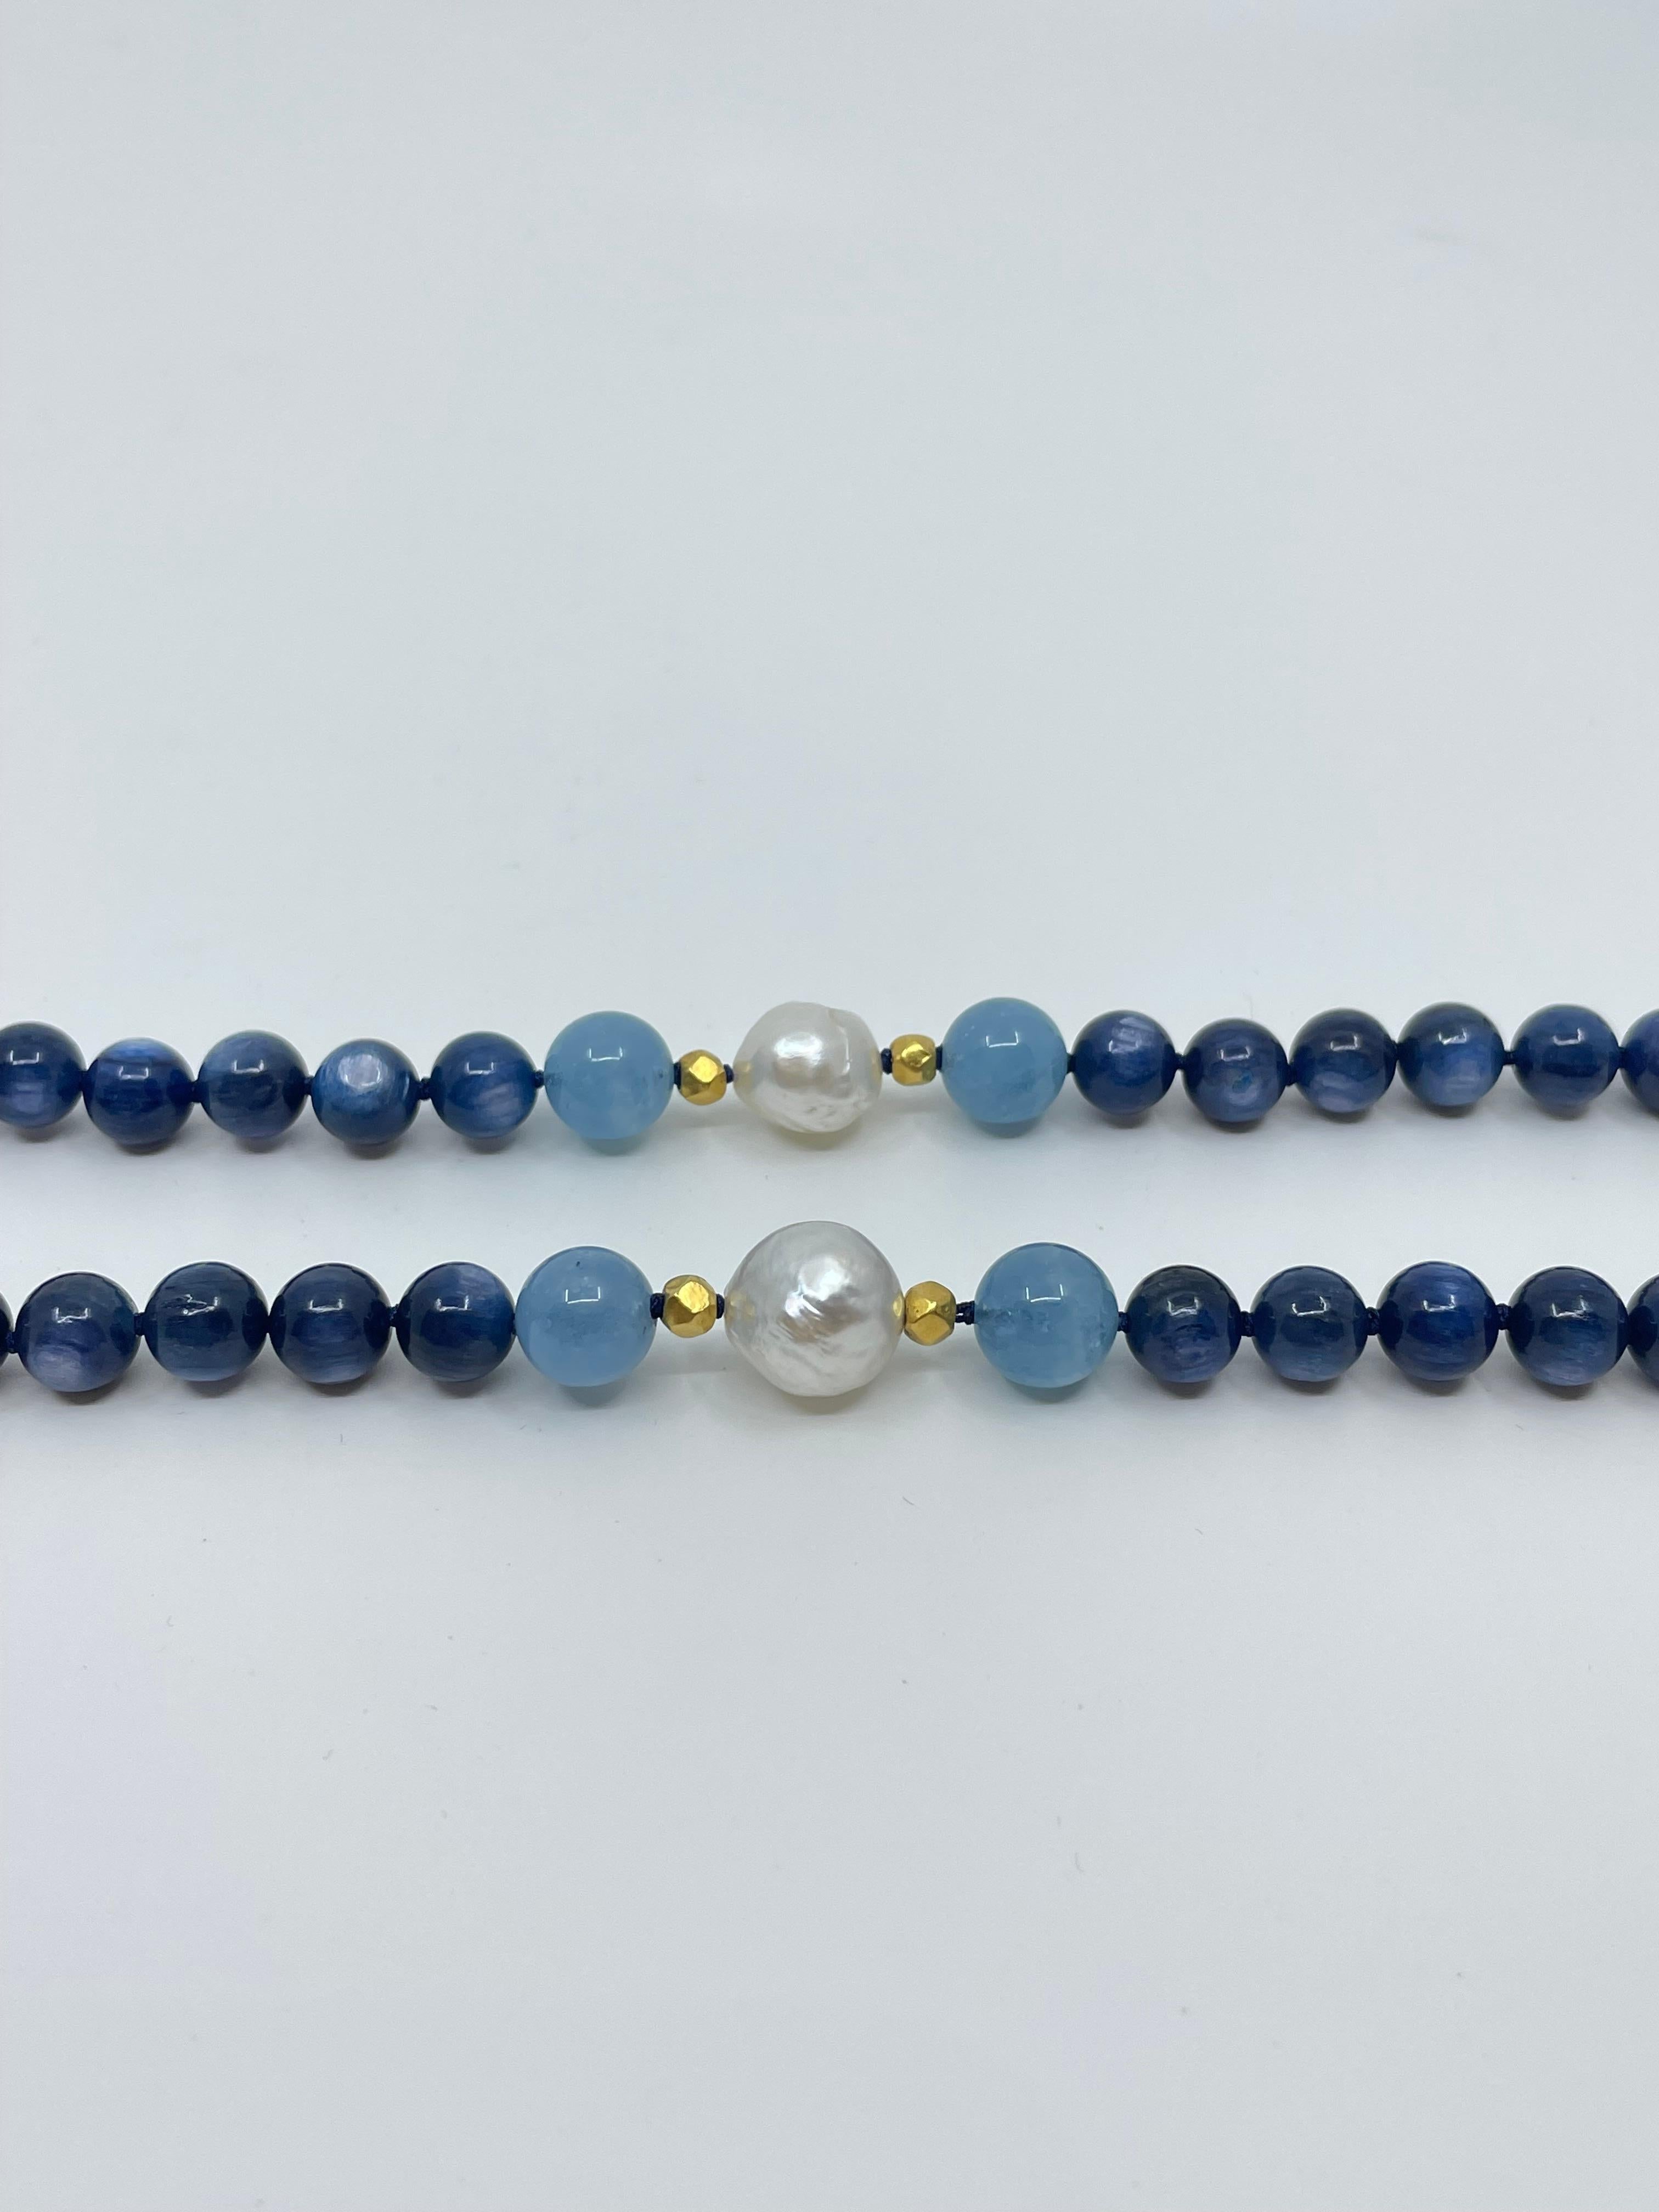 Long Necklace with Kyanite, Aquamarine, South Sea Pearls & 18K Solid Gold Beads For Sale 9